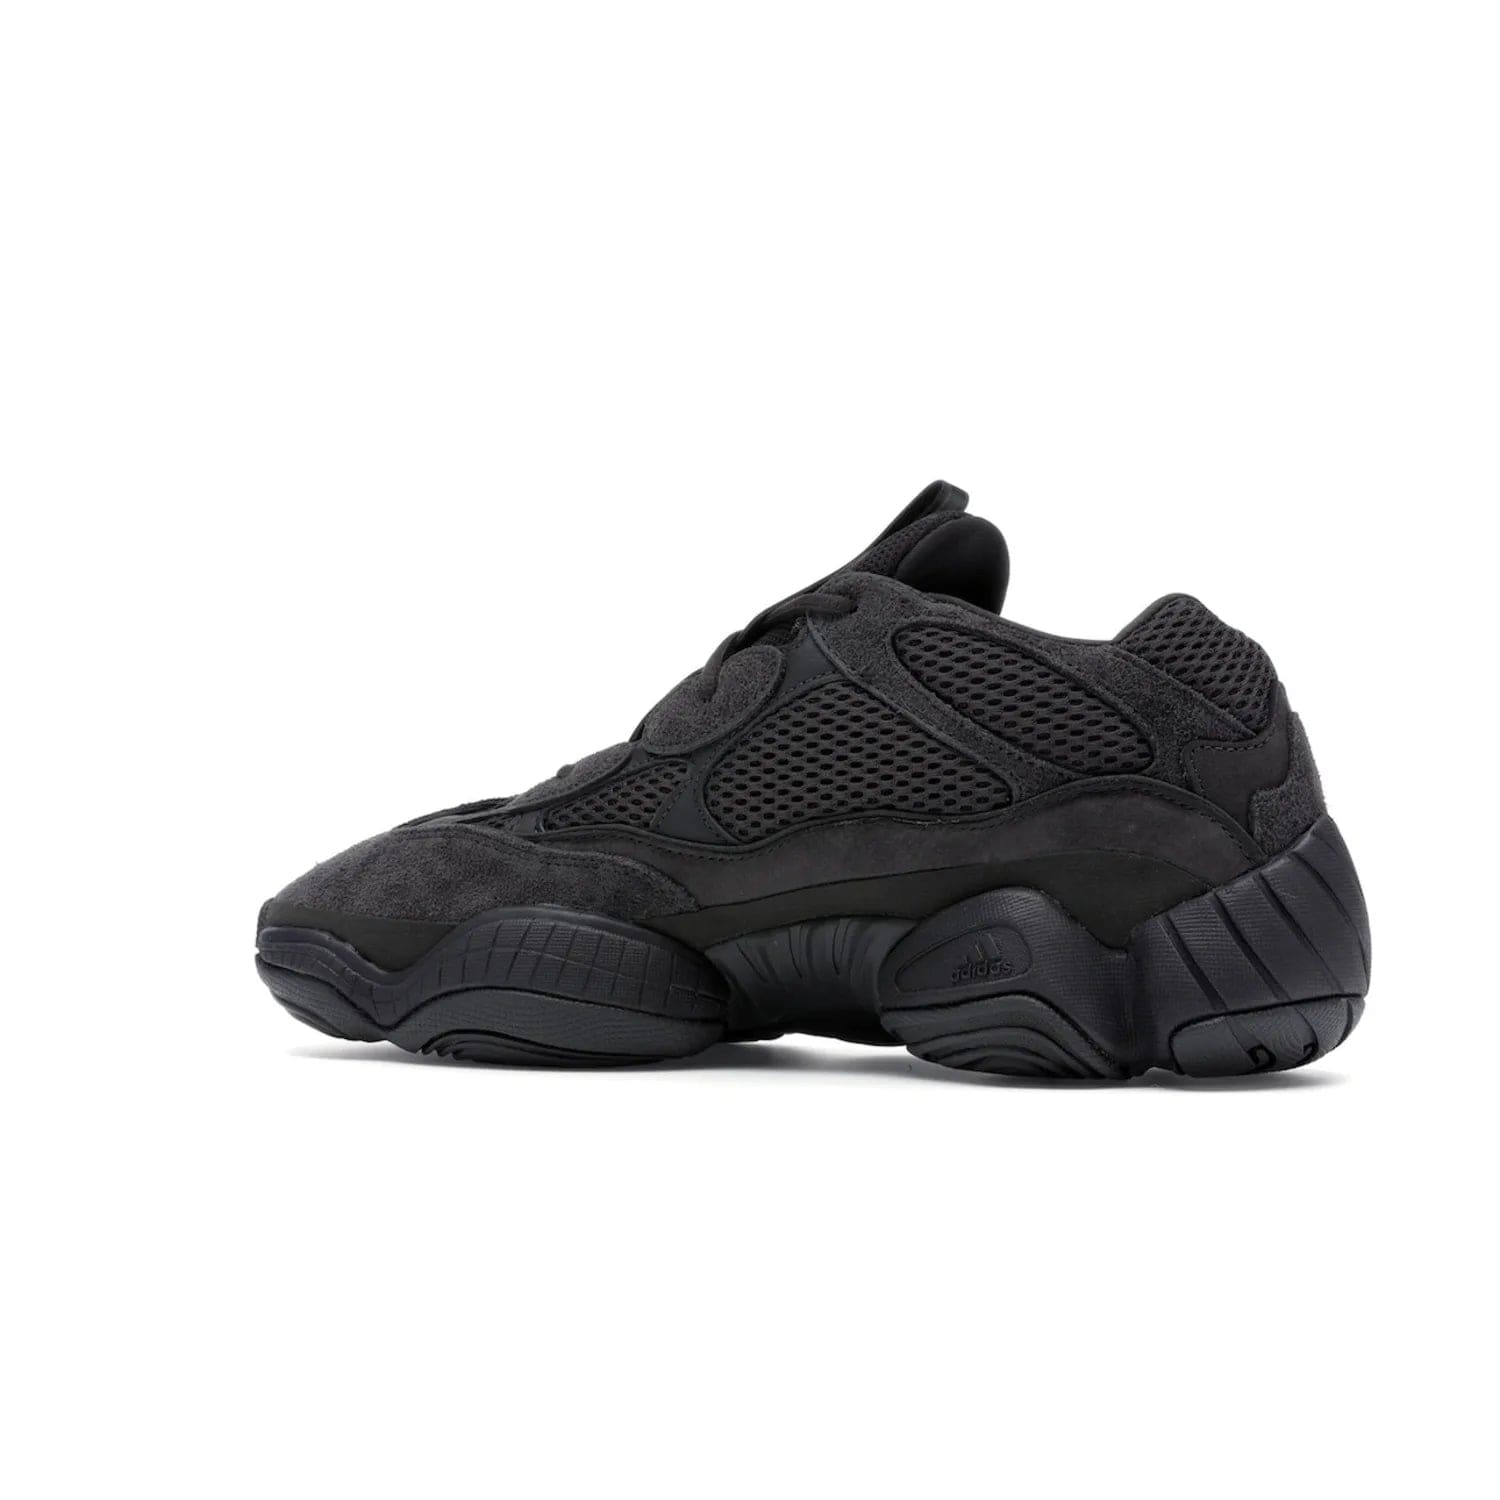 adidas Yeezy 500 Utility Black - Image 22 - Only at www.BallersClubKickz.com - Iconic adidas Yeezy 500 Utility Black in All-Black colorway. Durable black mesh and suede upper with adiPRENE® sole delivers comfort and support. Be unstoppable with the Yeezy 500 Utility Black. Released July 2018.